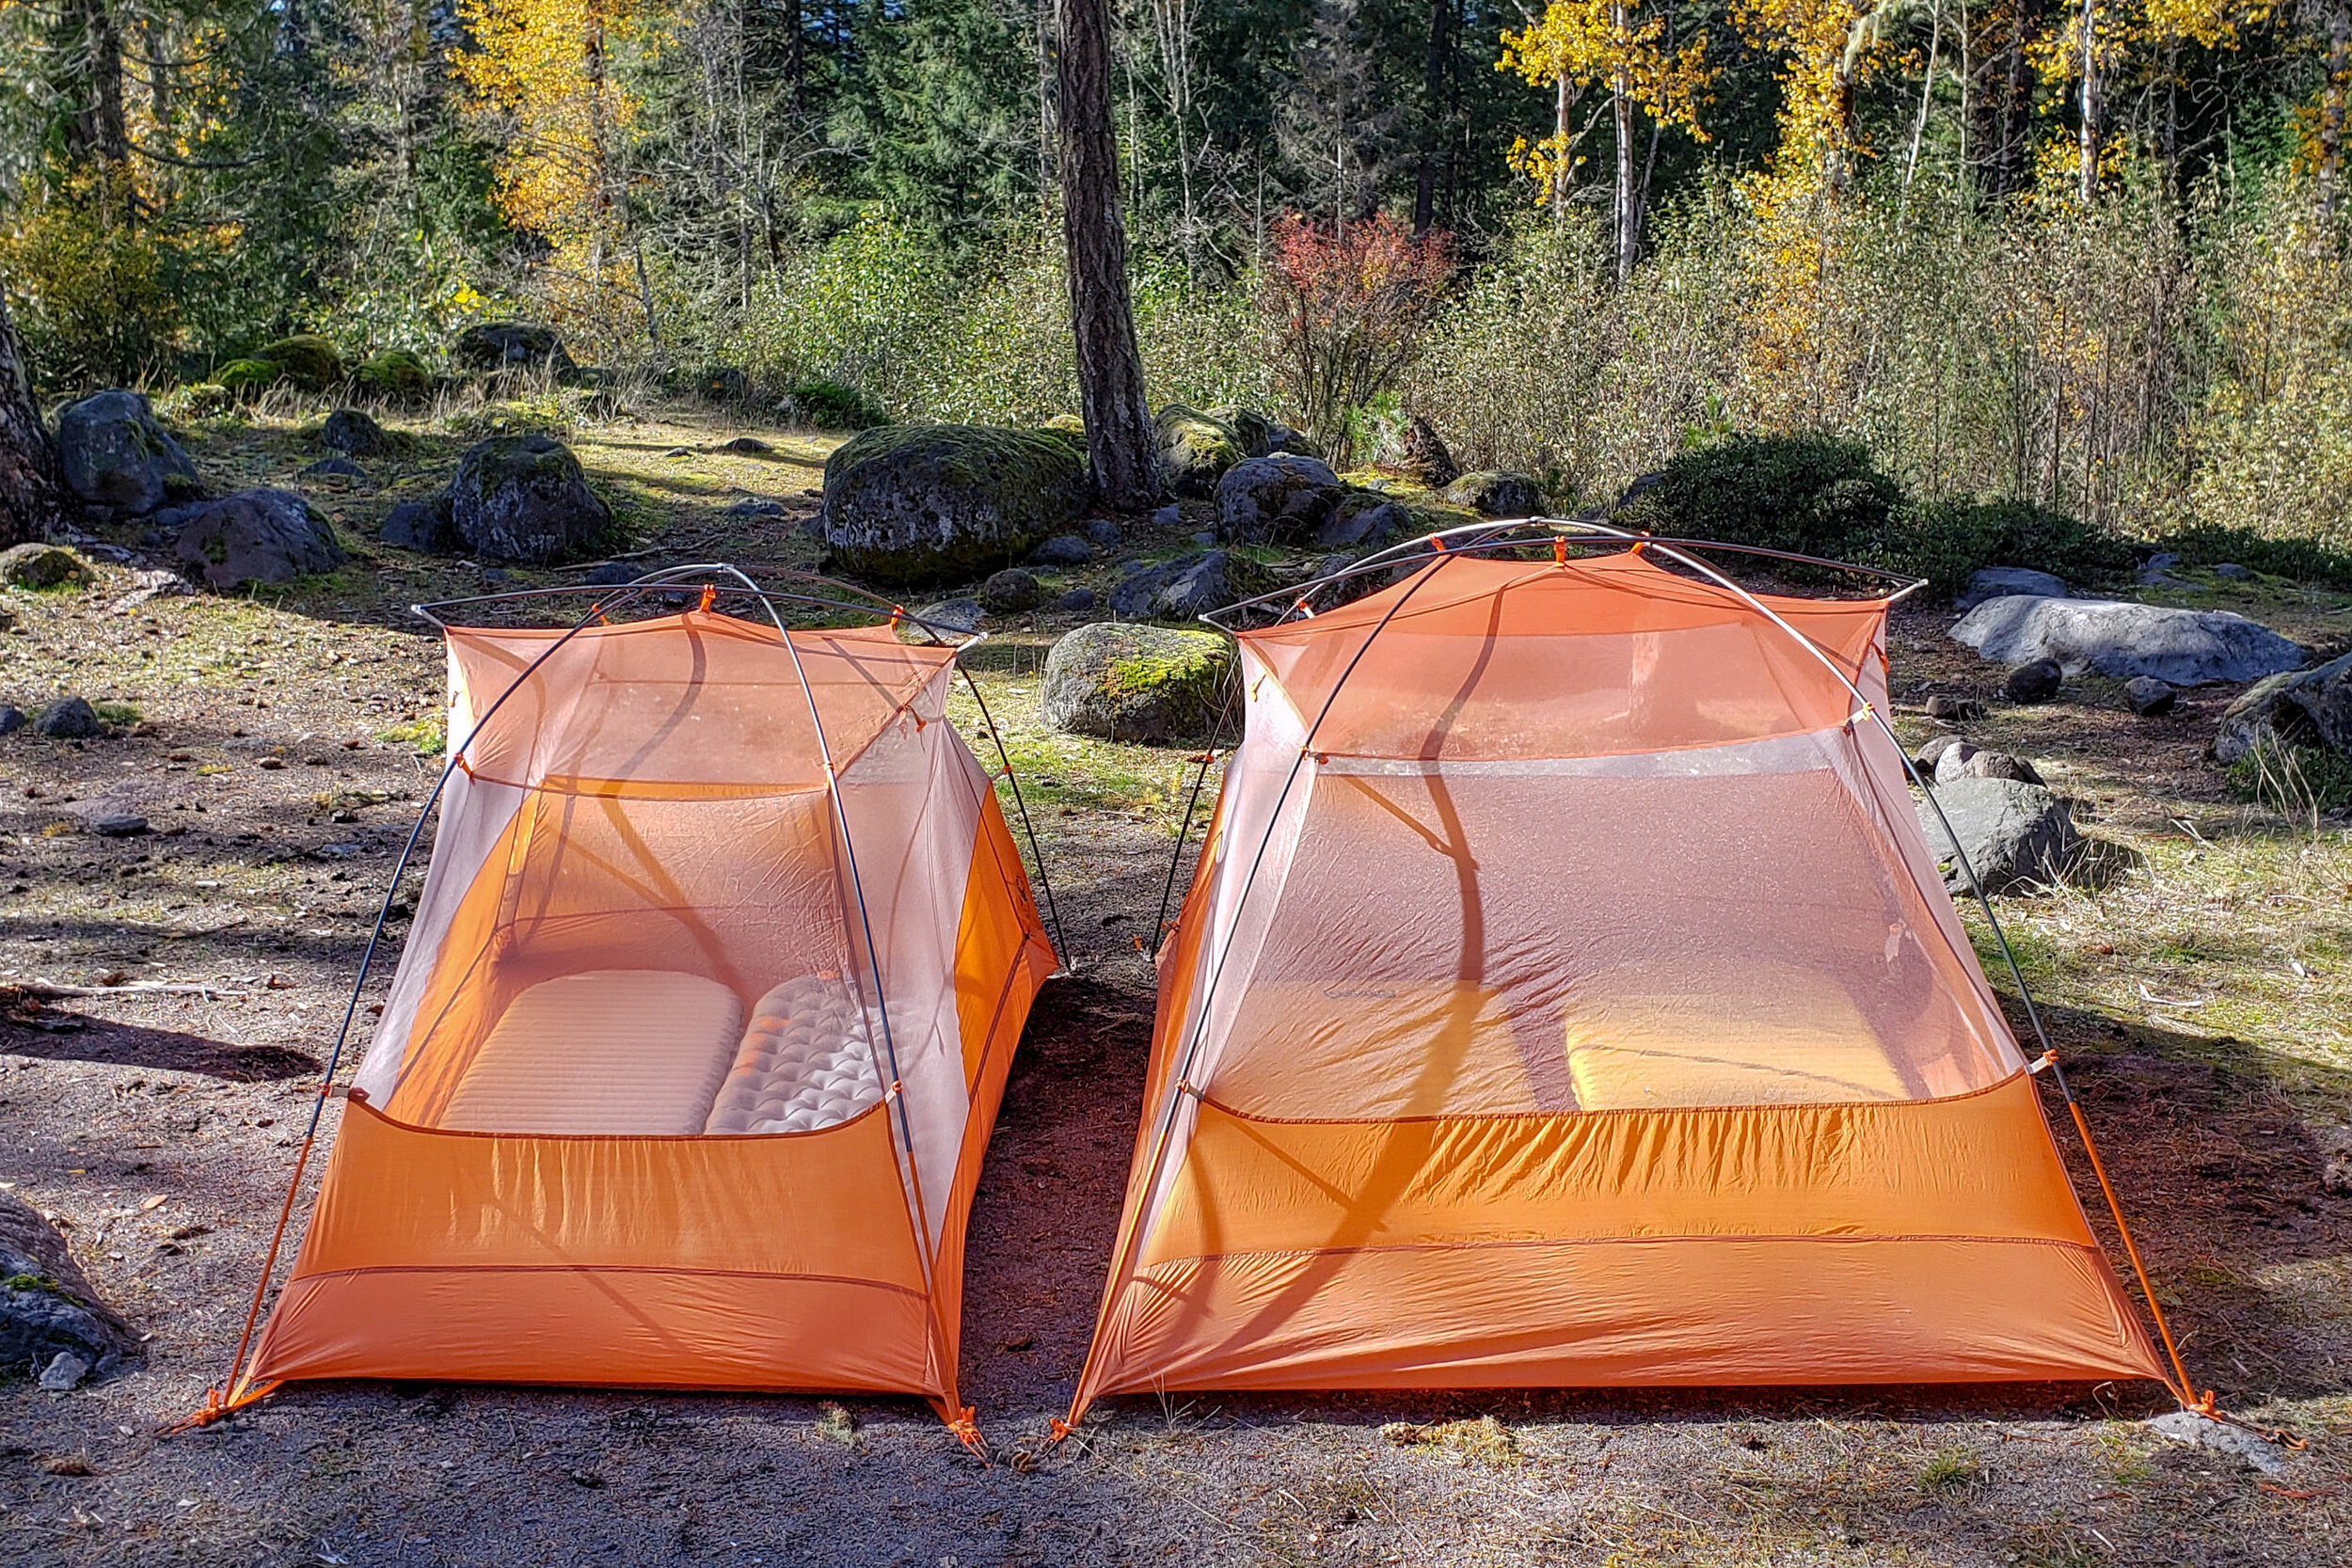 Copper Spur HV Ul 2 person tent with two regular sized pads versus the HV UL 3 person with two wide sleeping pads.